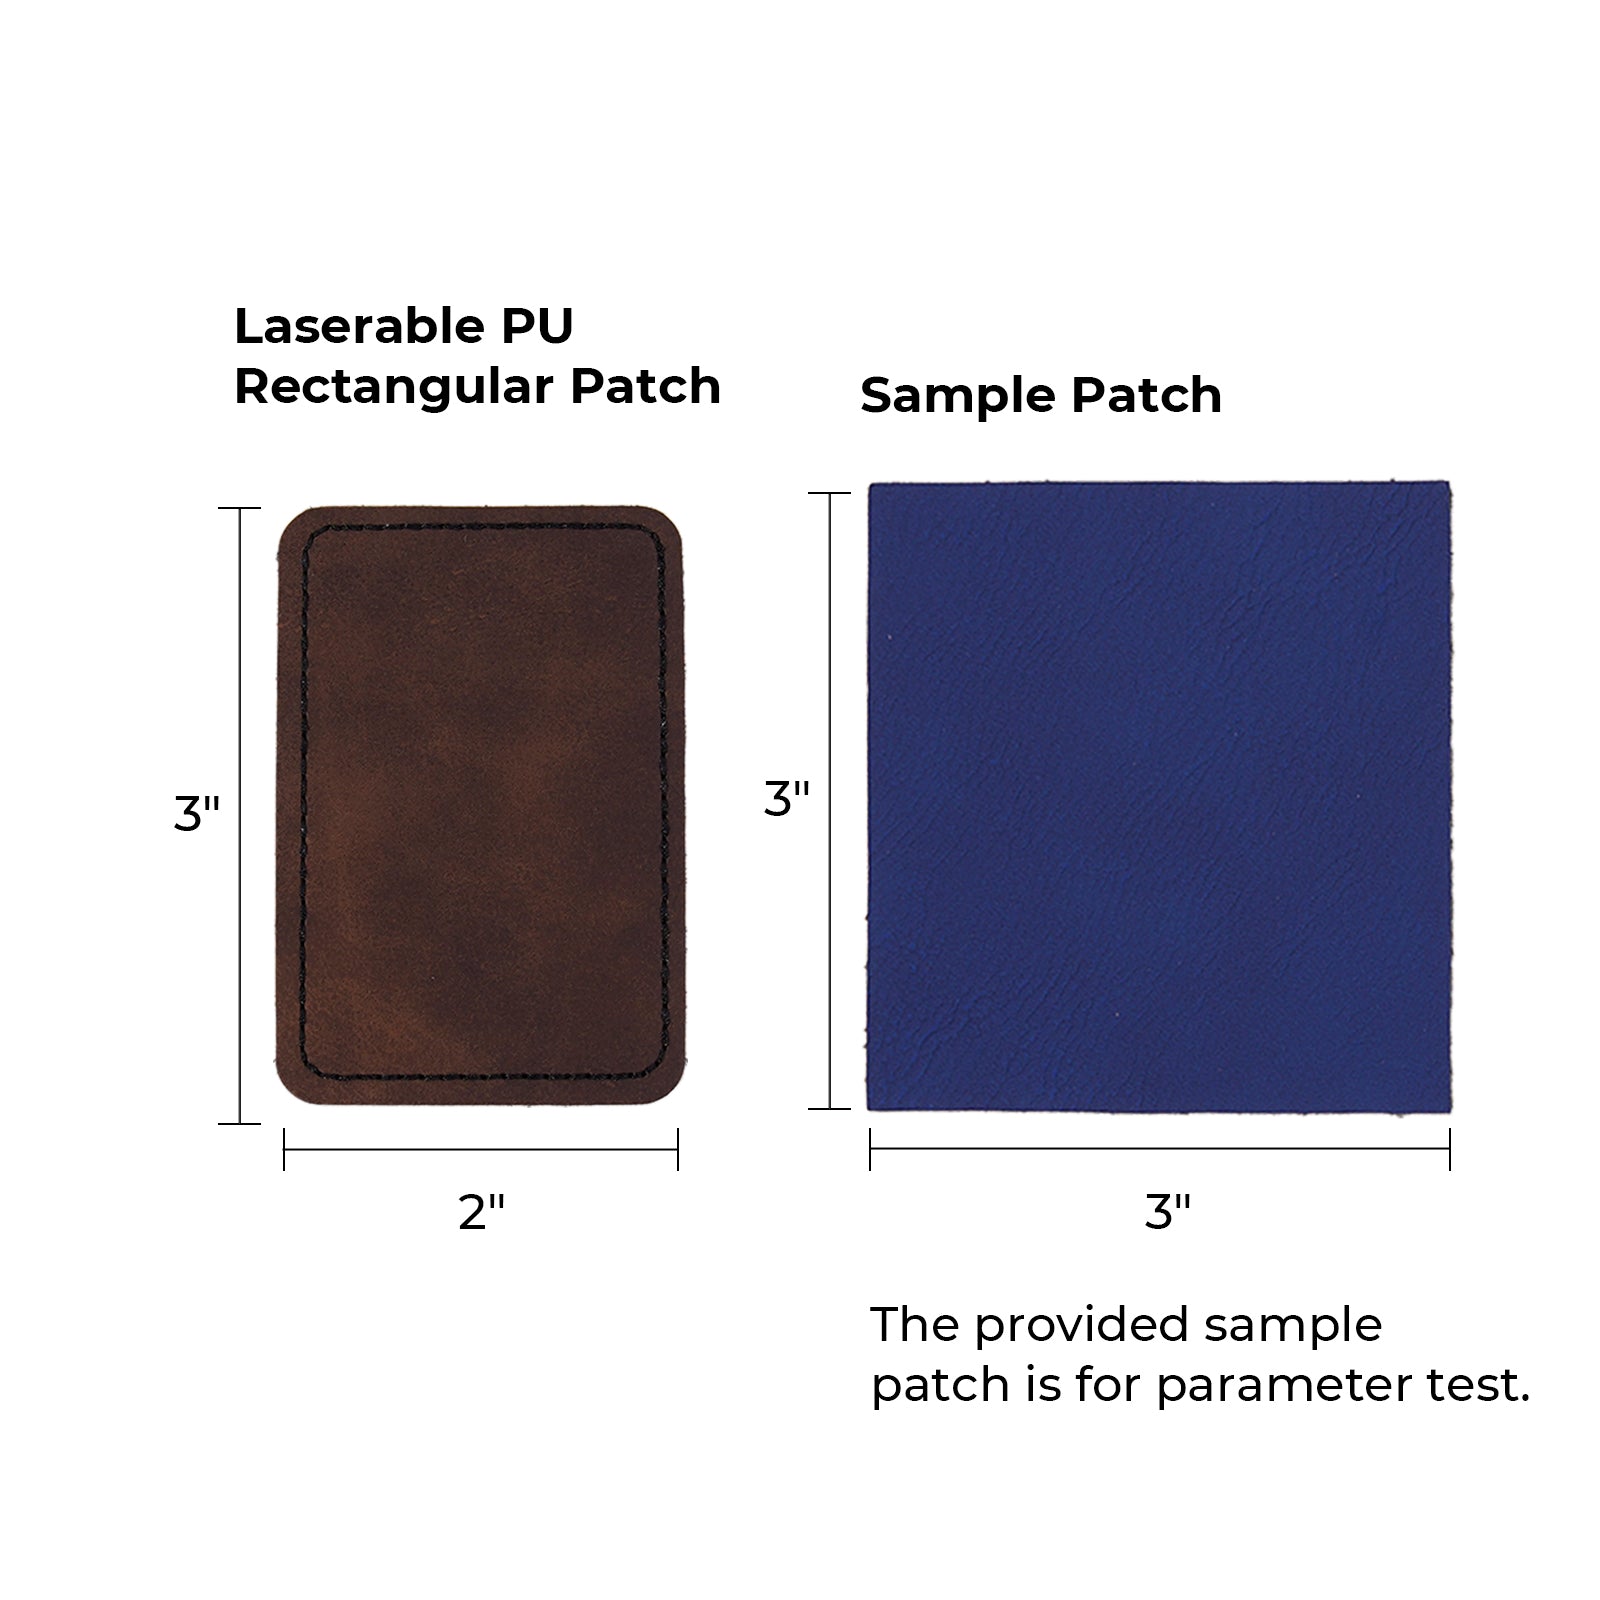 Brown to Gold Laserable PU Rectangular Patch (10pcs)